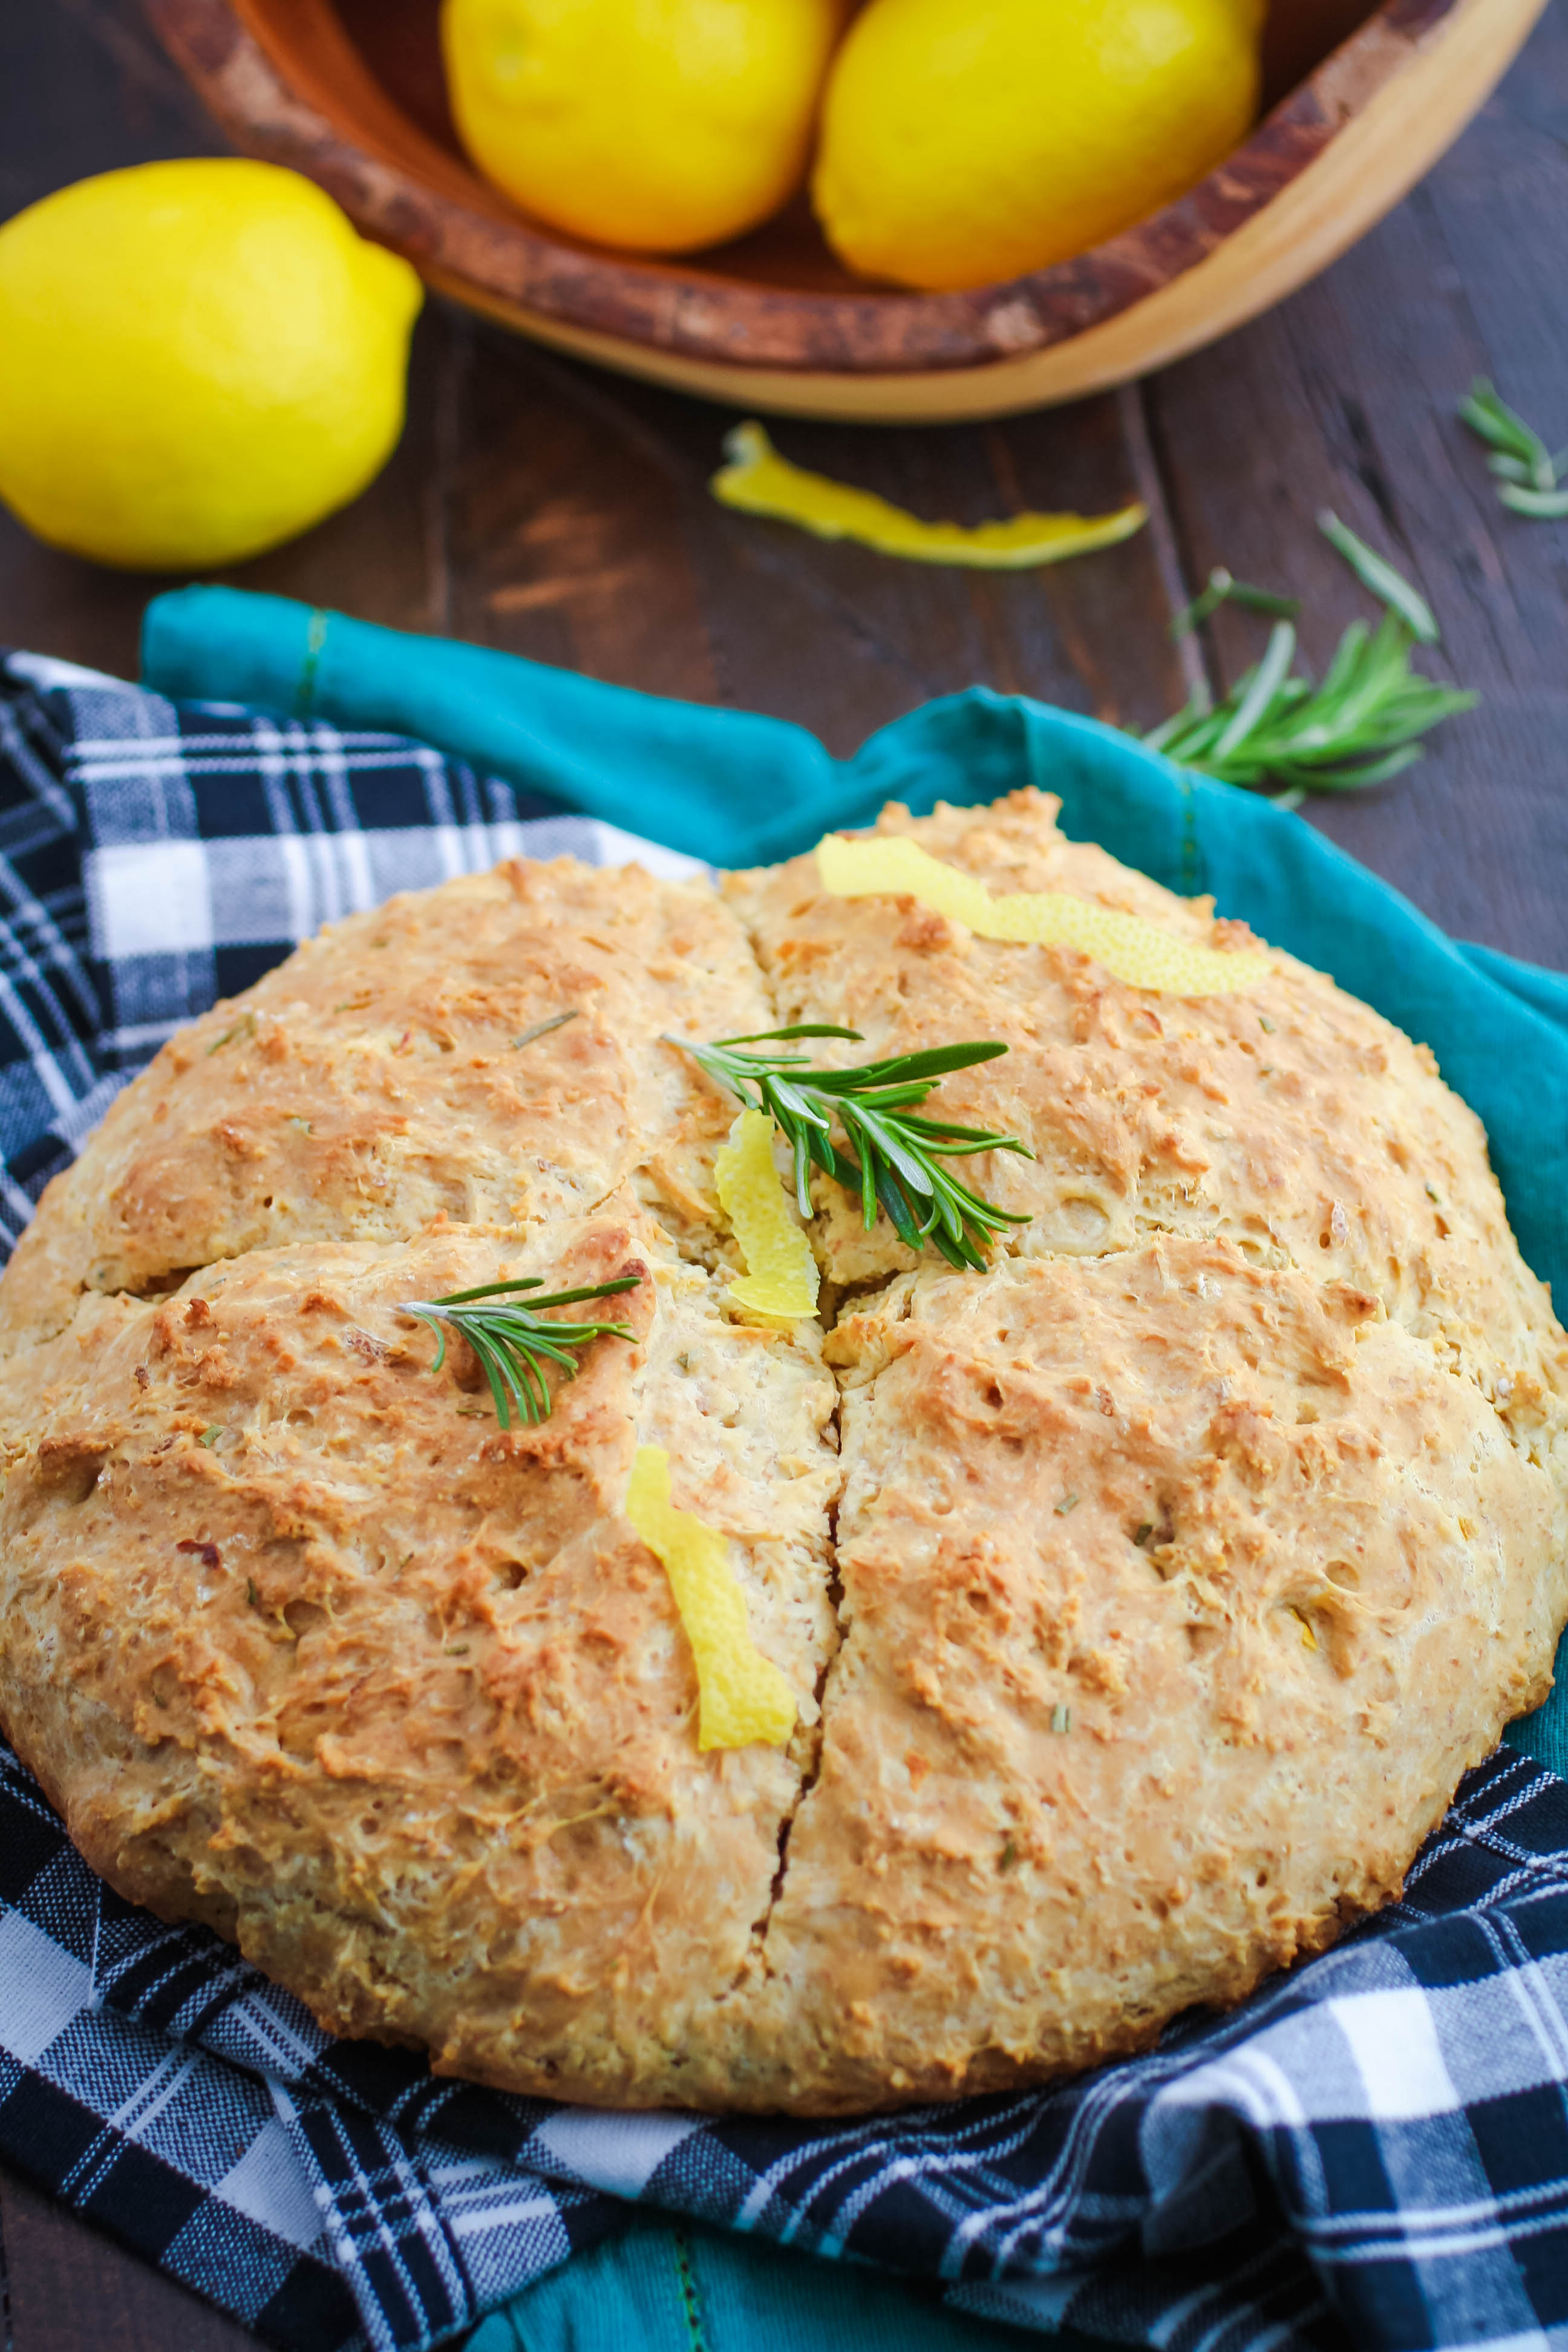 Irish Soda Bread with Rosemary & Lemon is an easy-to-make side that's perfect any time of year. Irish Soda Bread with Rosemary & Lemon is a delightful quick bread you'll love.